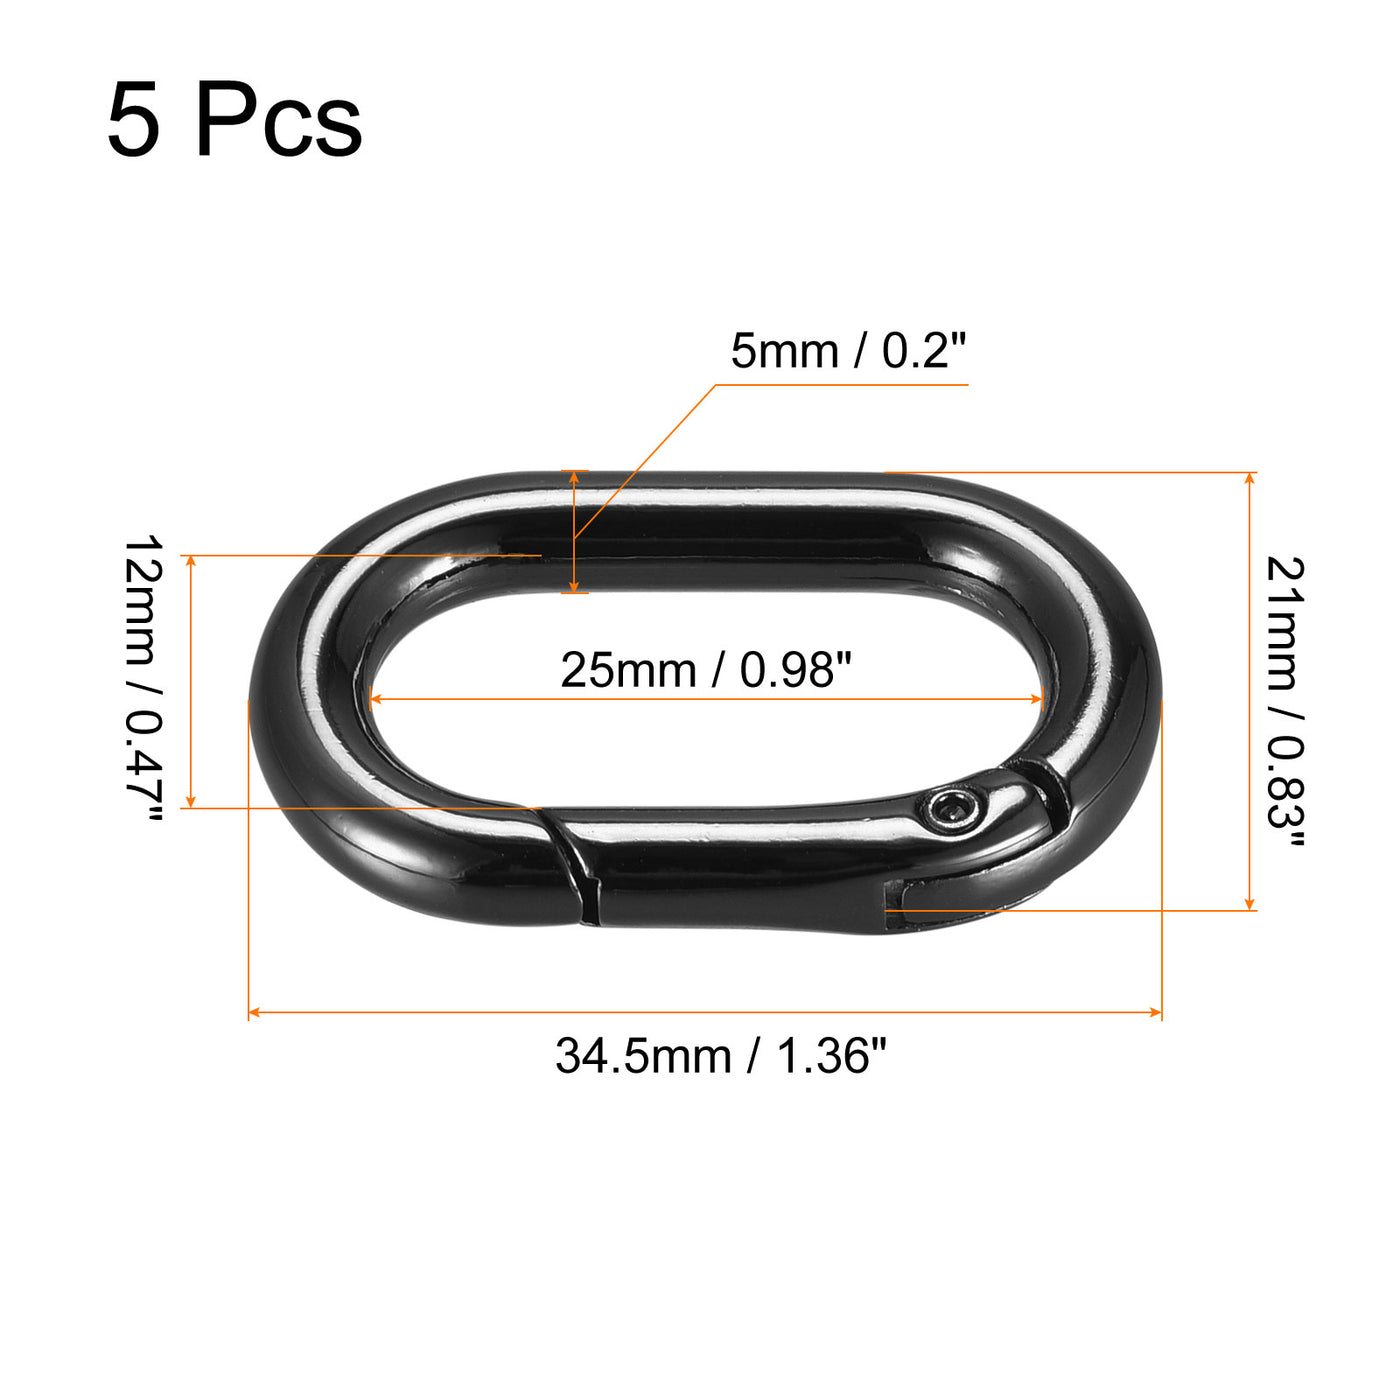 uxcell Uxcell 1.36" Spring Oval Ring Snap Clip Trigger for Bag Purse Keychain, 5Pcs Black